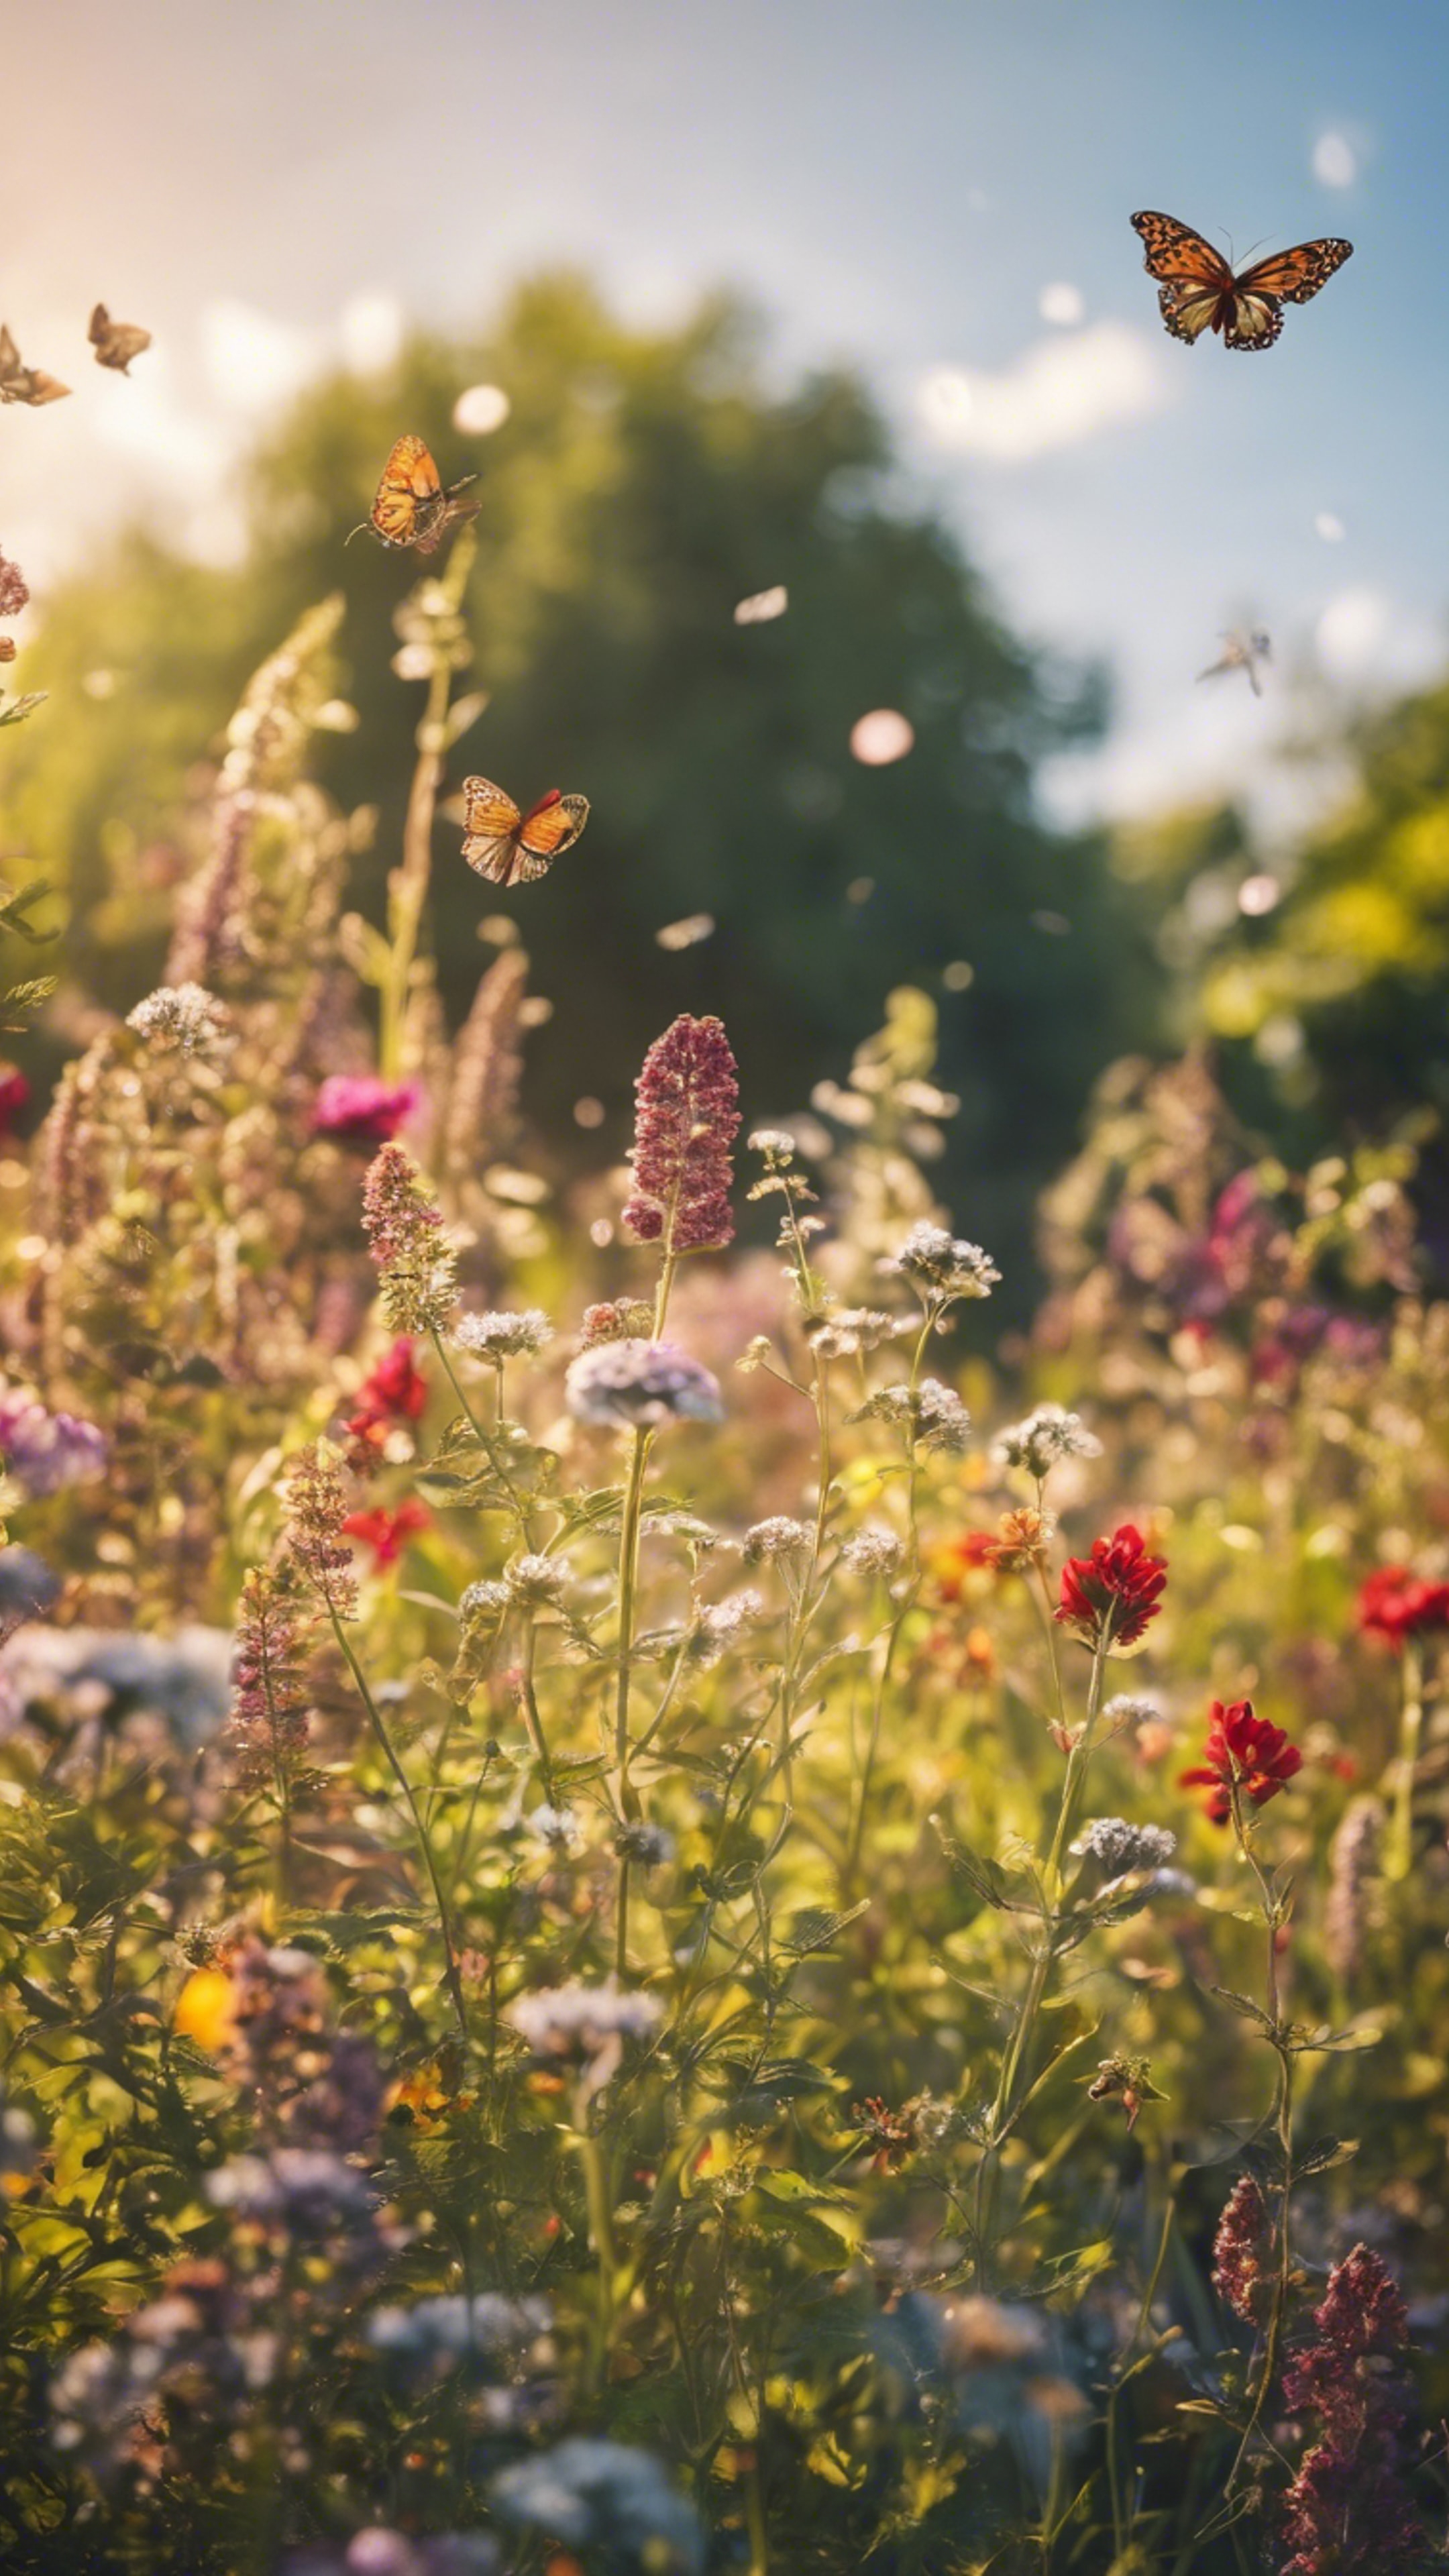 A colorful scene of a French country garden bursting with wildflowers and butterflies under a warm afternoon sun.壁紙[d1166188c03b4b319ebf]